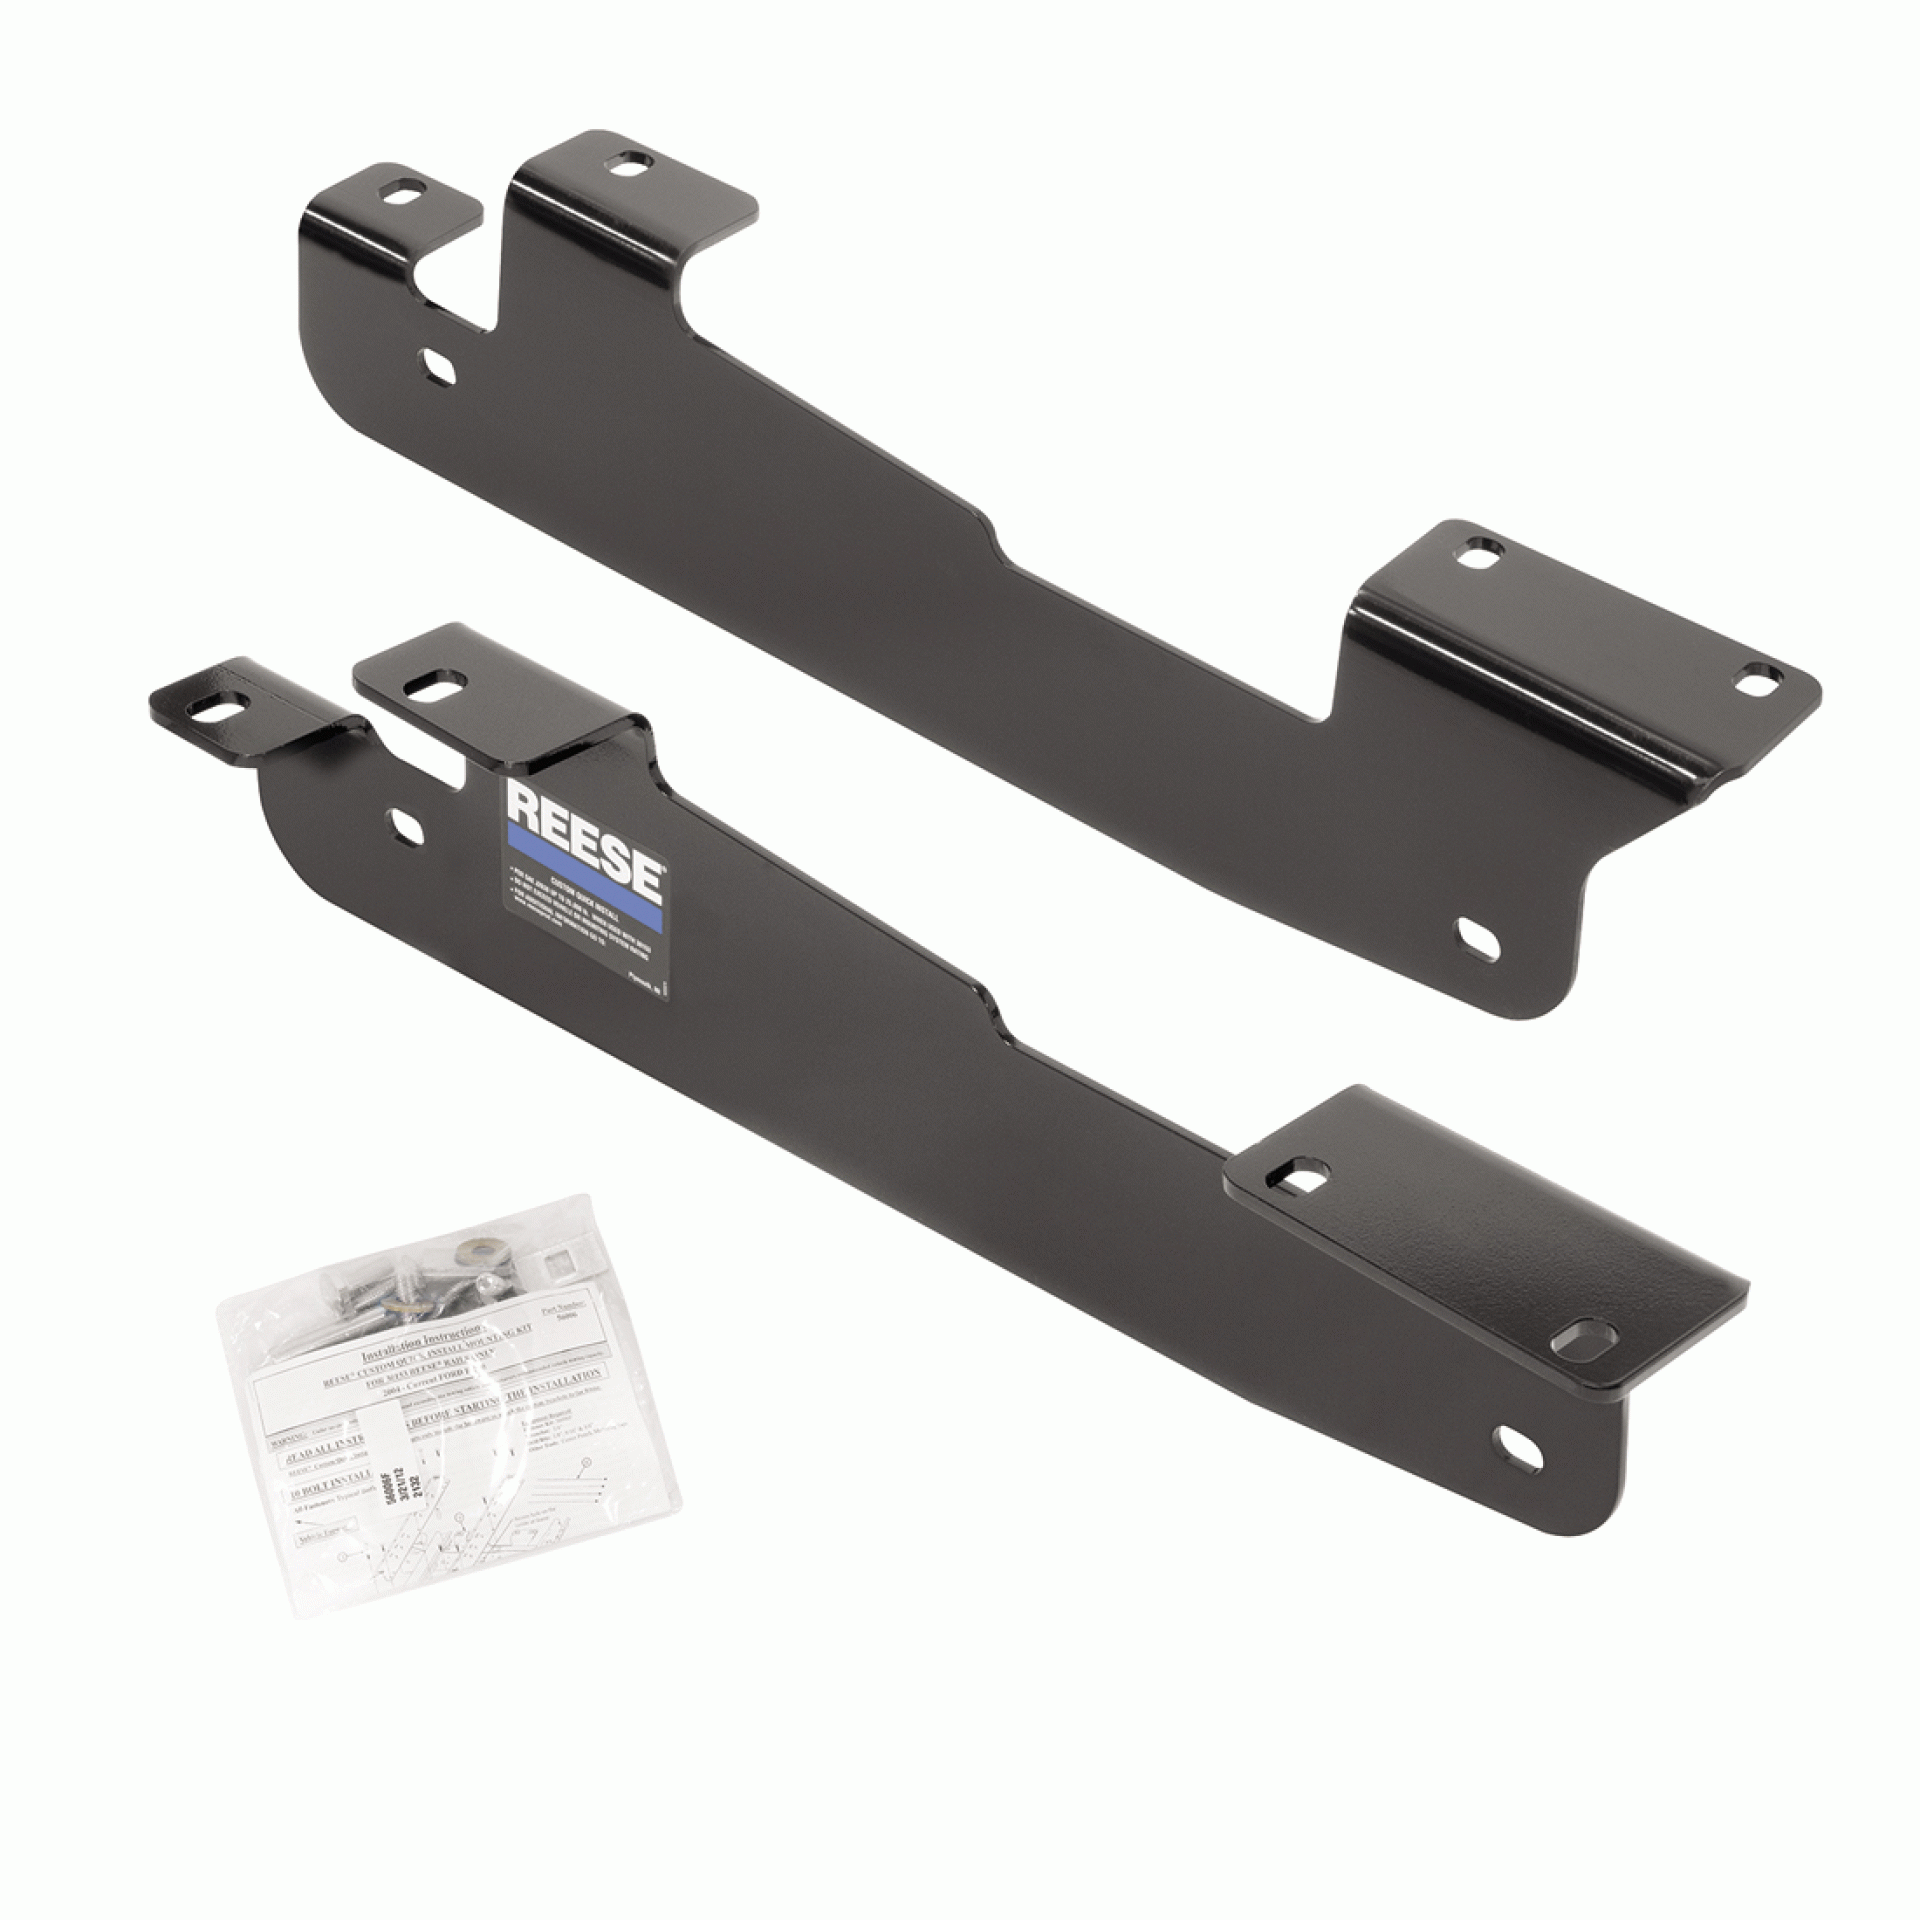 REESE | 56006 | BRACKET KIT FOR FIFTH WHEEL OUTBOARD QUICK INSTALL BRACKETS MUST BE USED WITH 5630153 RAIL KIT